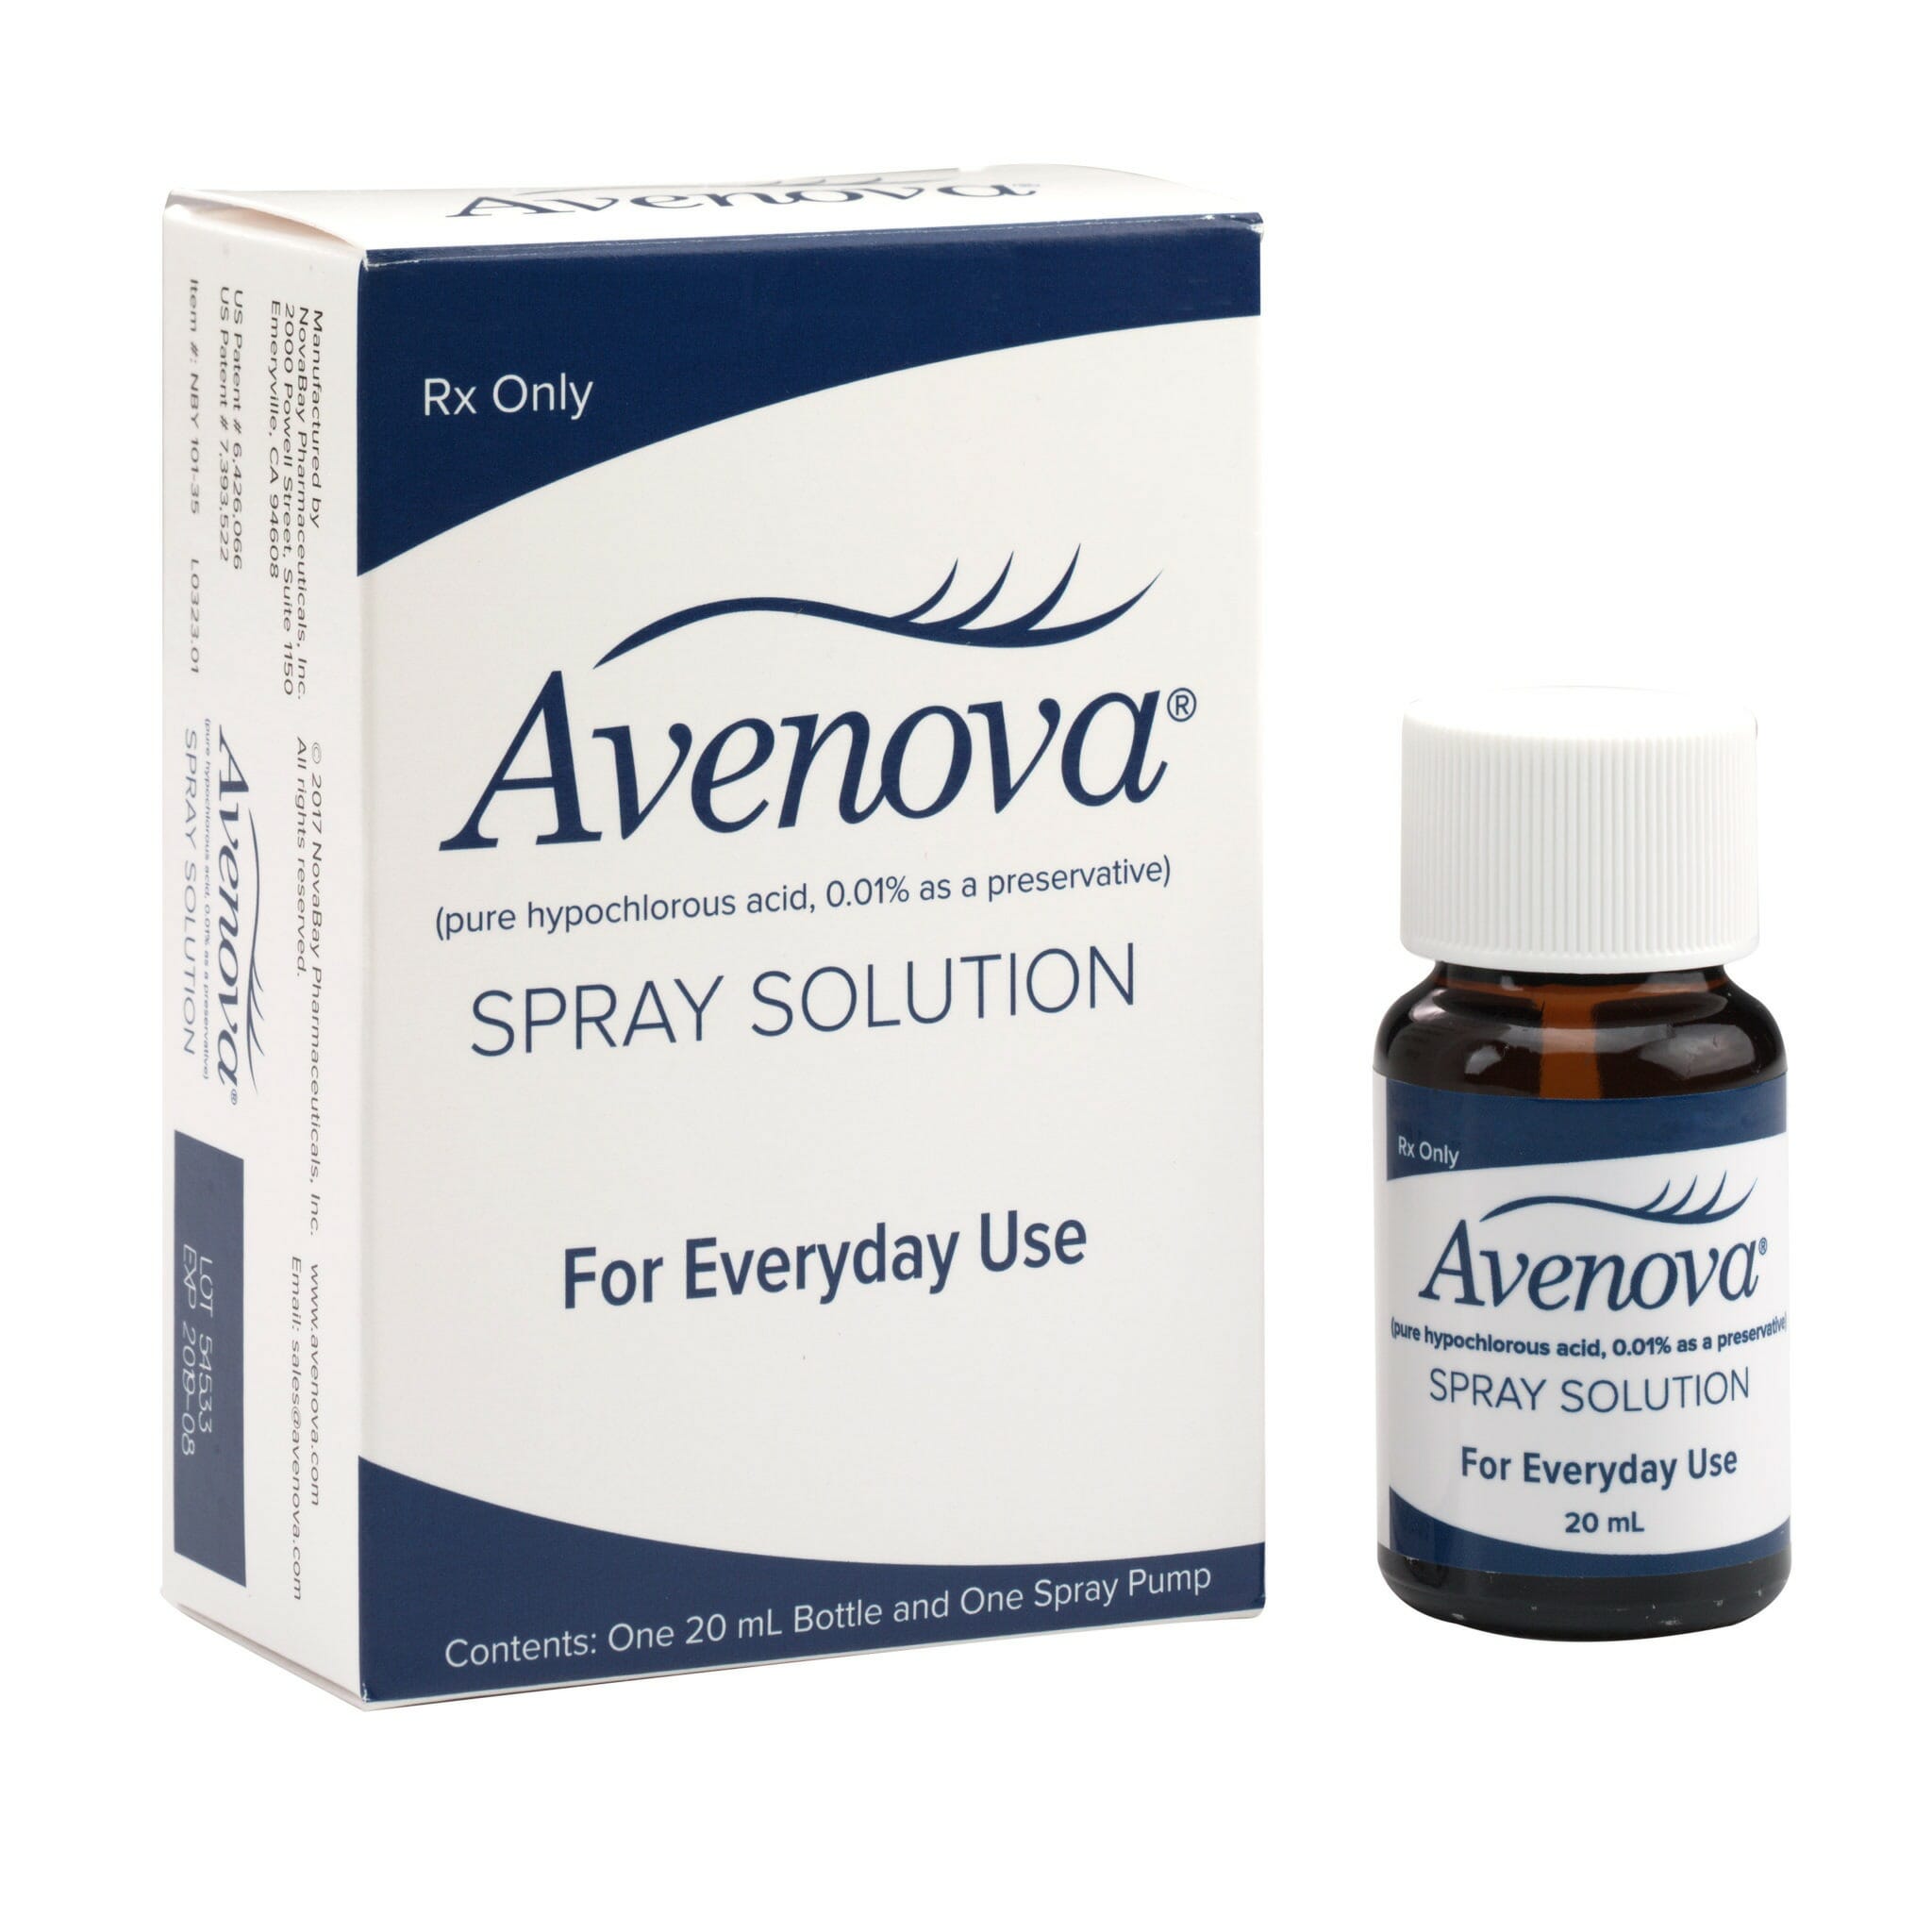 Does Avenova Eyelid Cleanser contain buffers, preservatives, or surfactants?